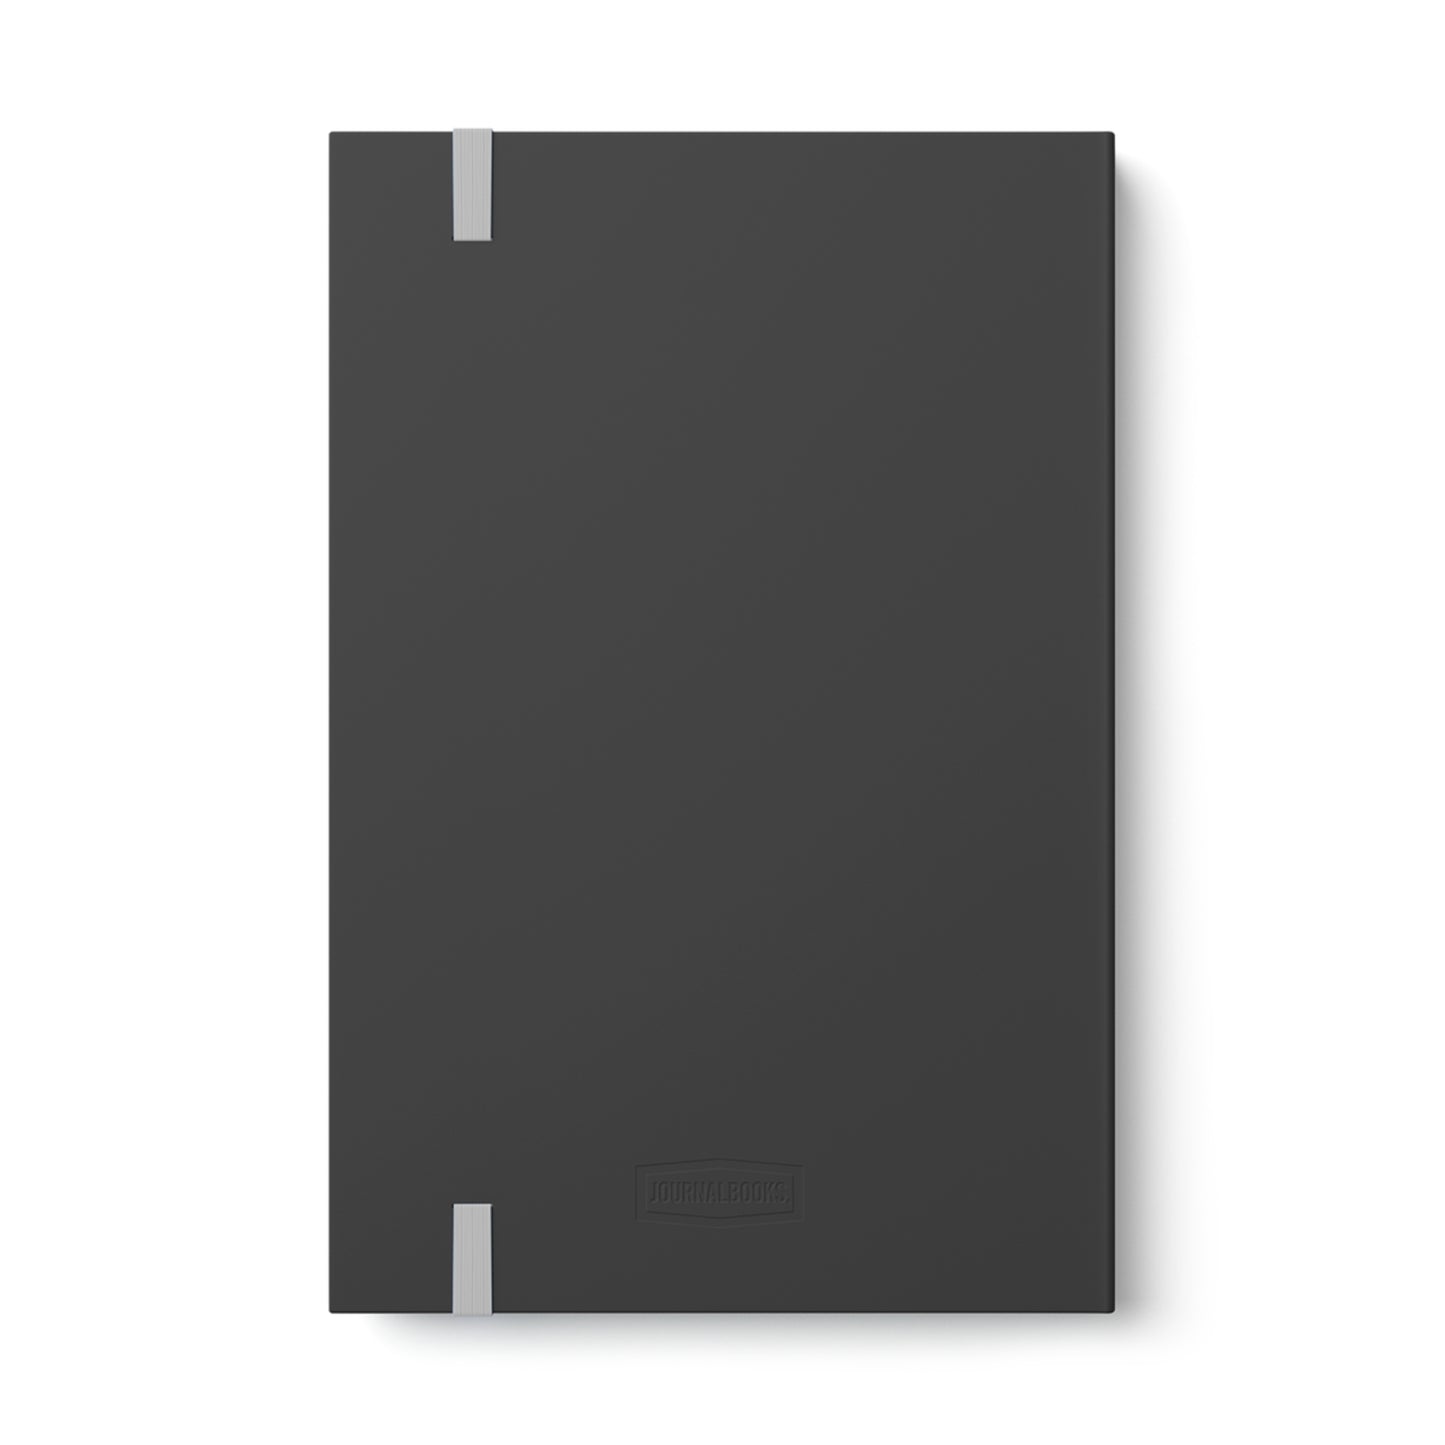 Cup of motivation Color Contrast Notebook - Ruled